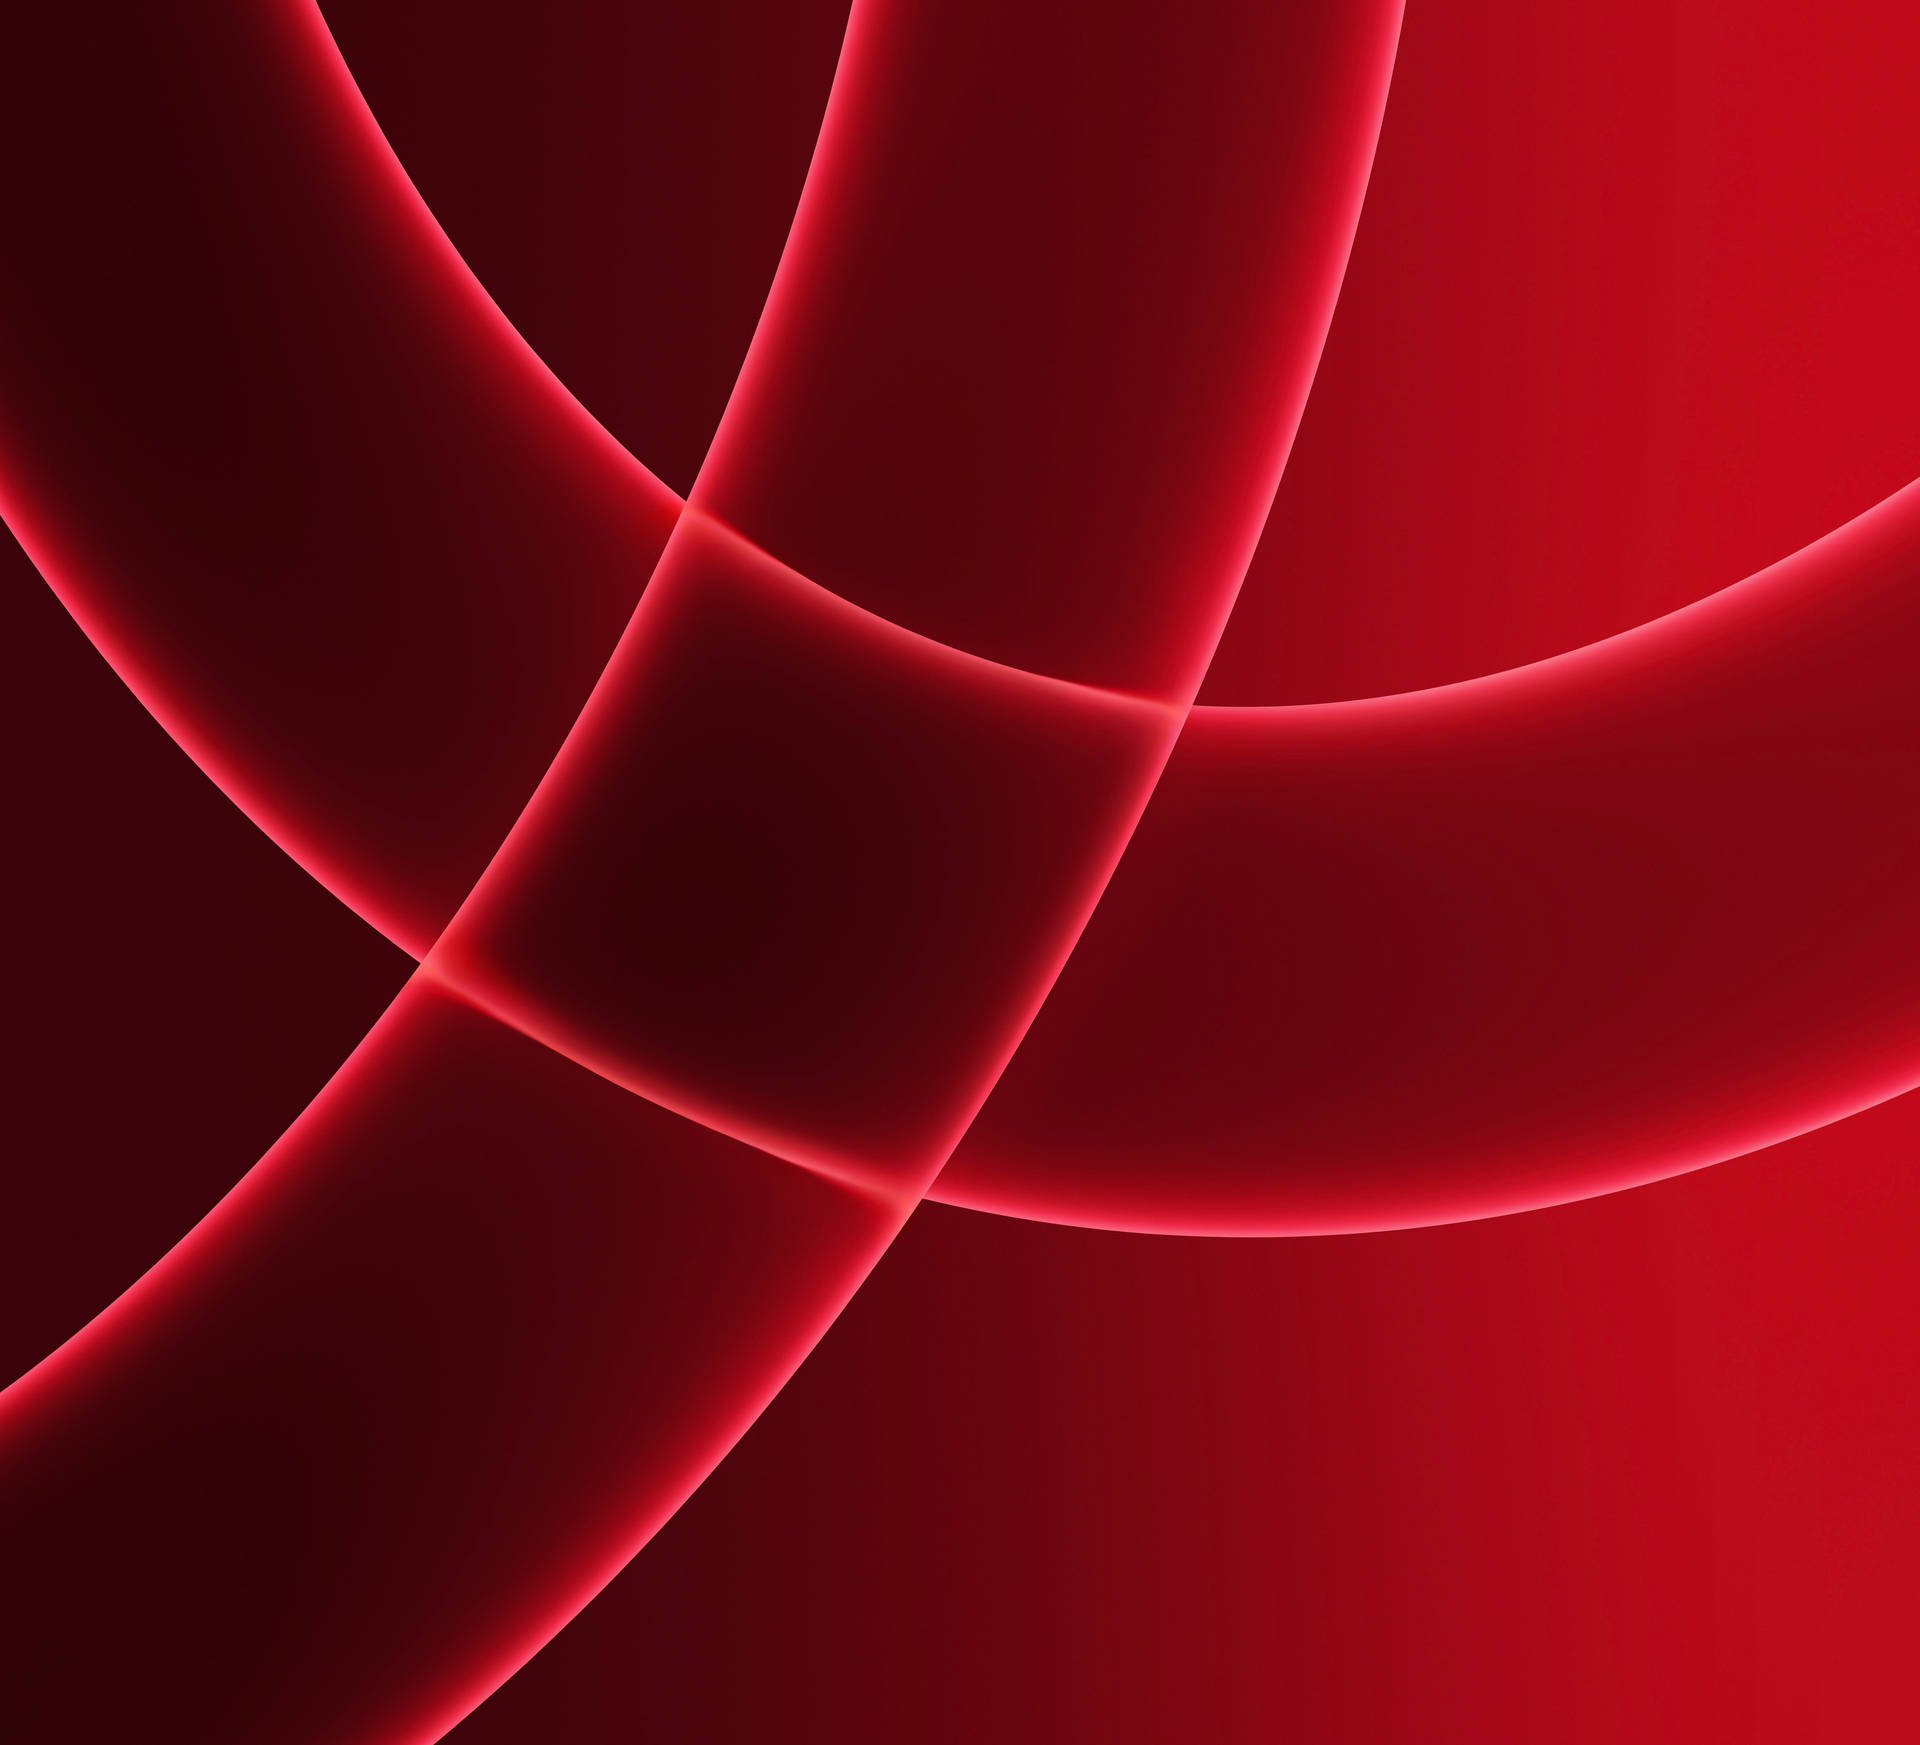 Neon Red Lines On Imac 4k Background